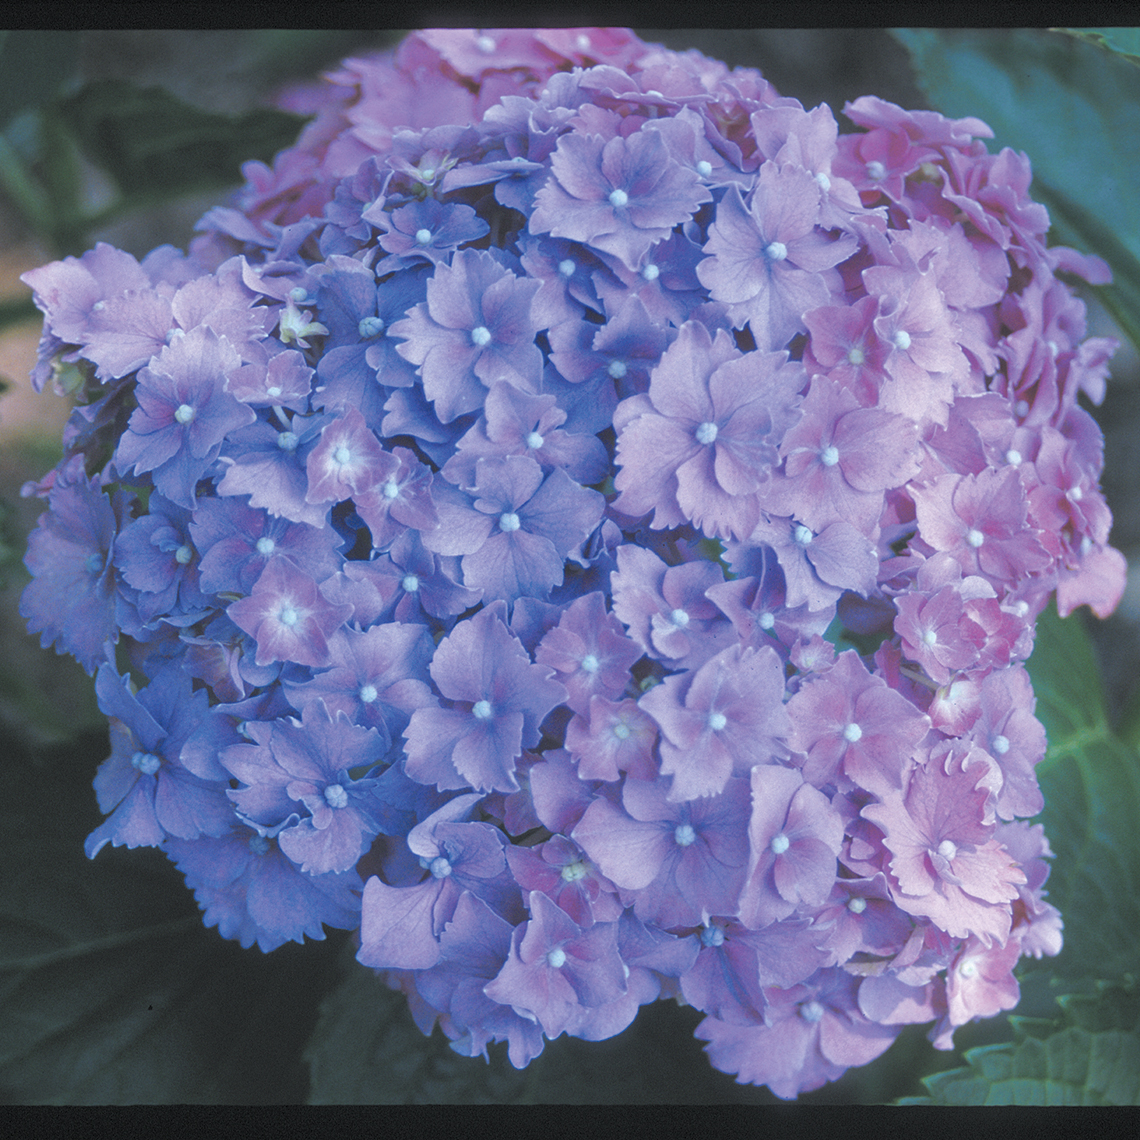 Closeup of the frilly blue bloom of Parzifal hydrangea